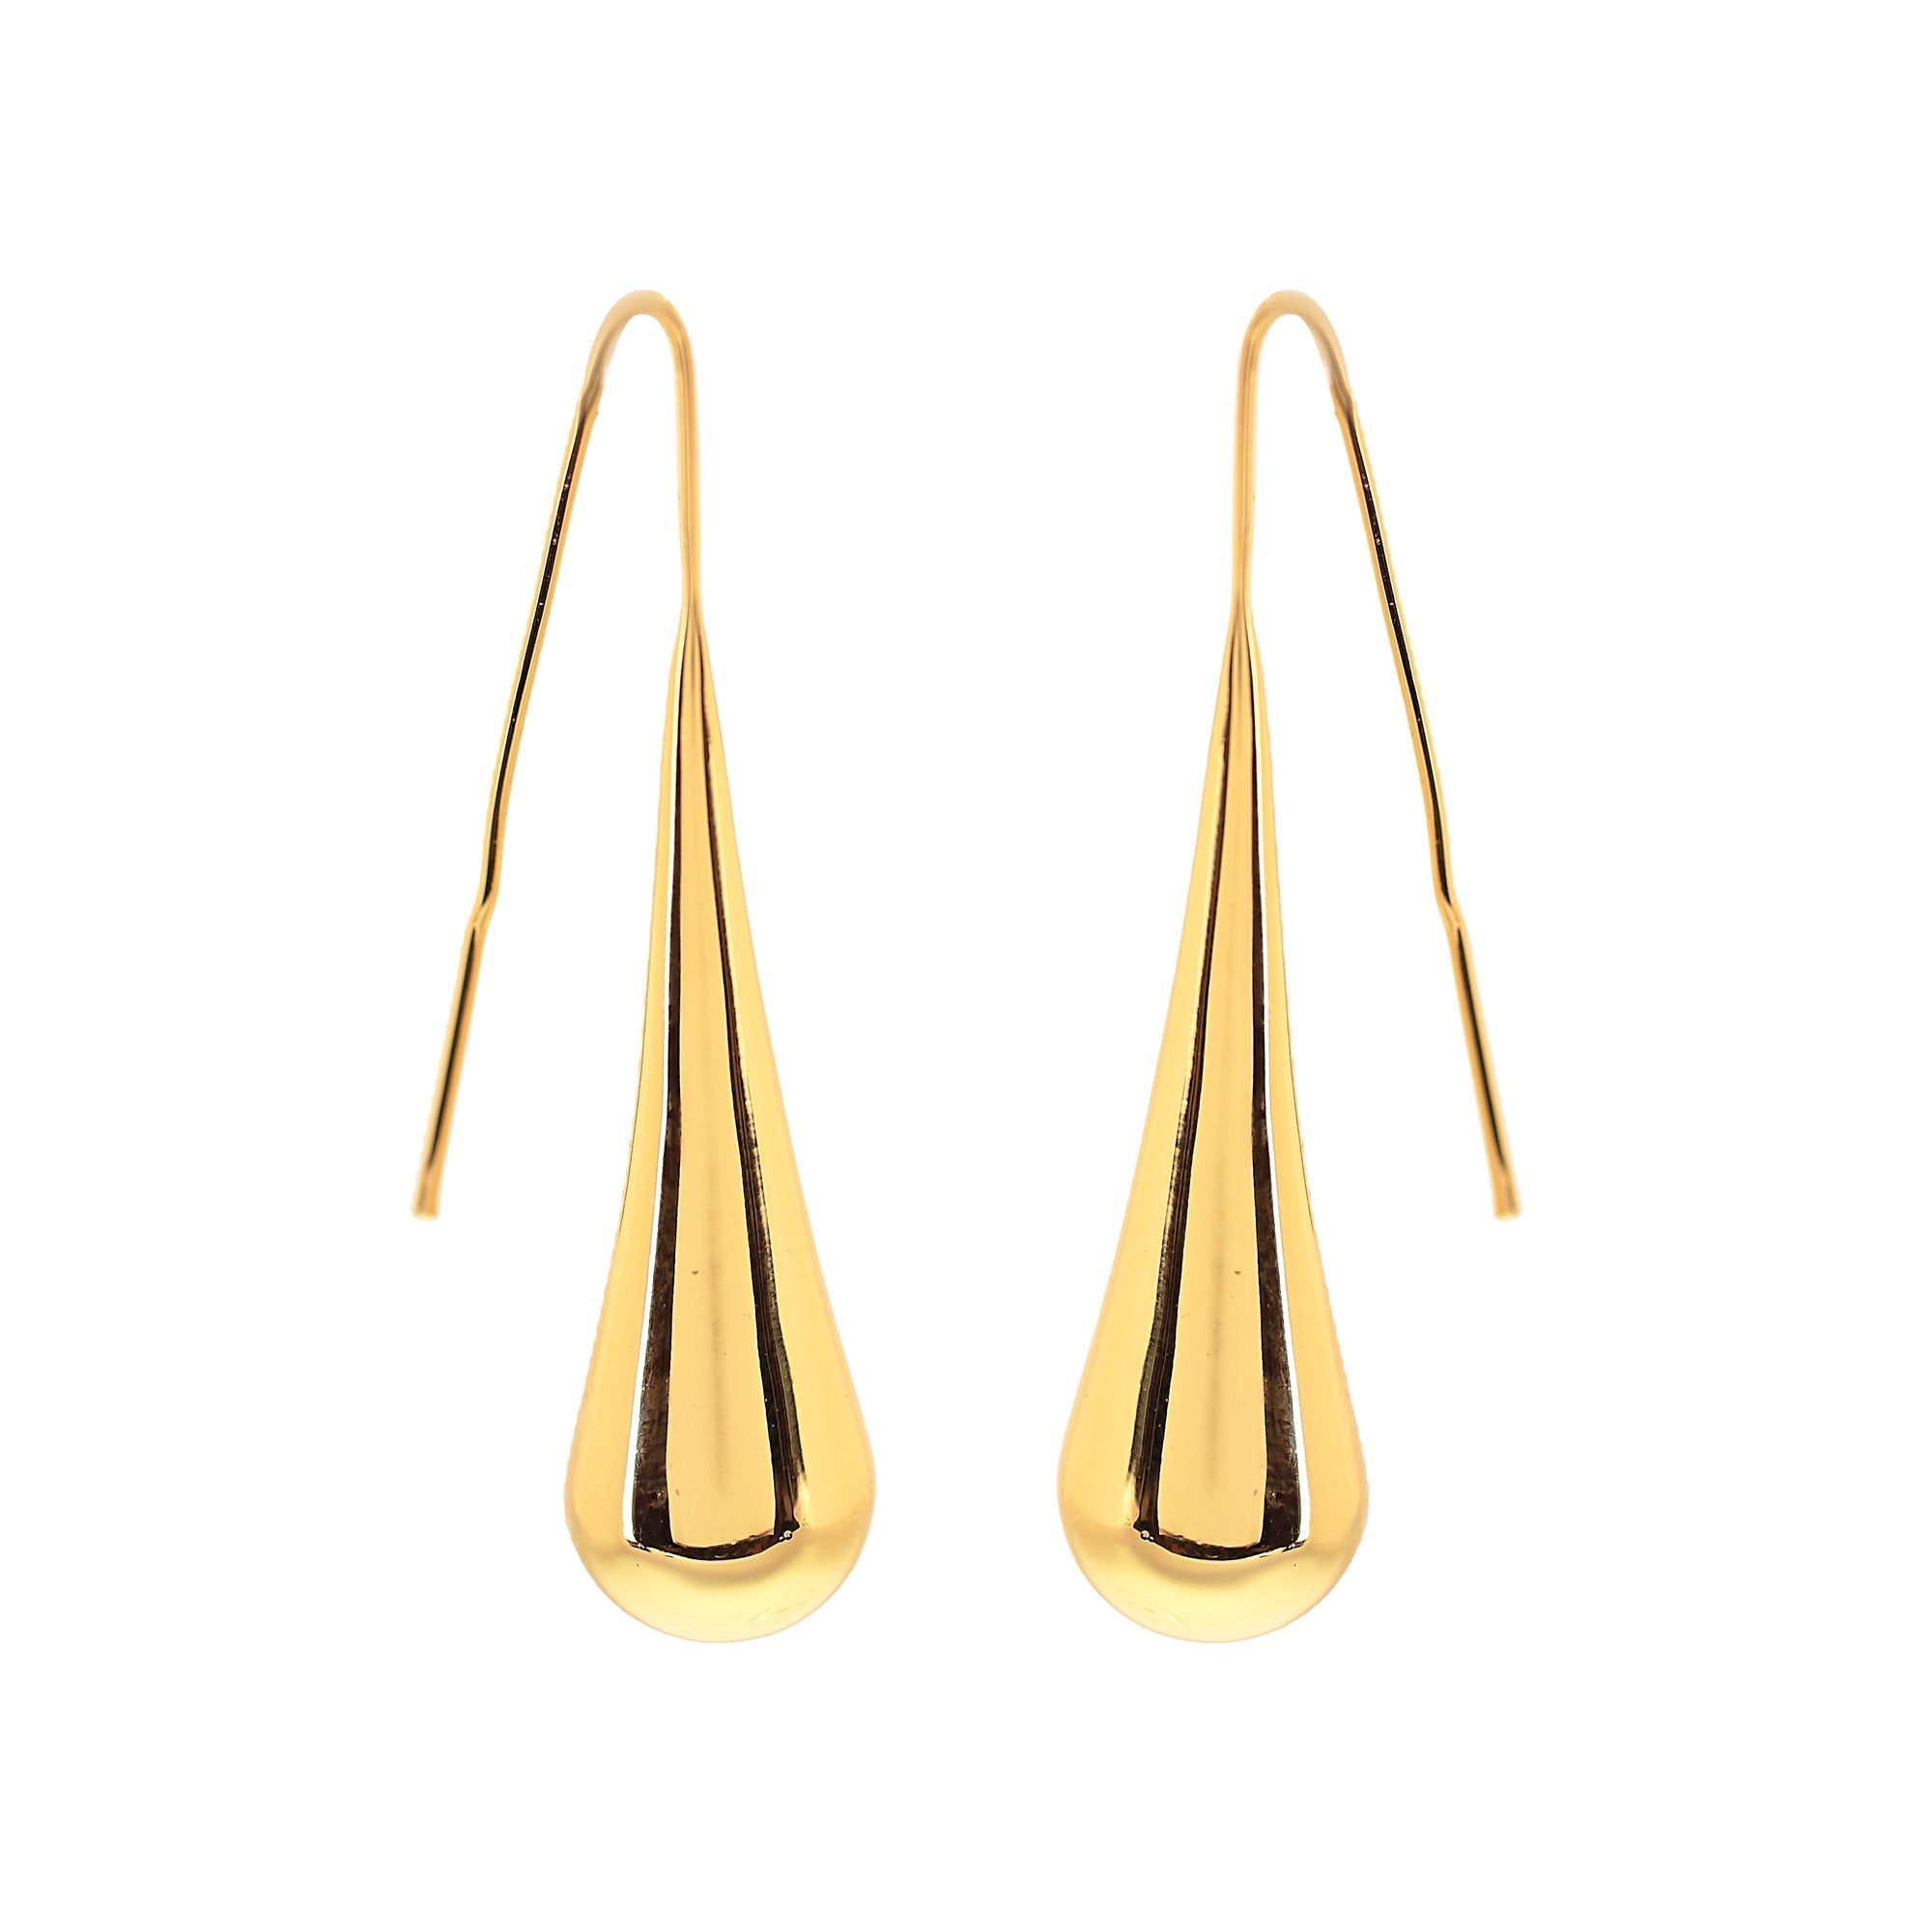 'EMPOWERED' Earrings -Gold- - Ibiza Passion